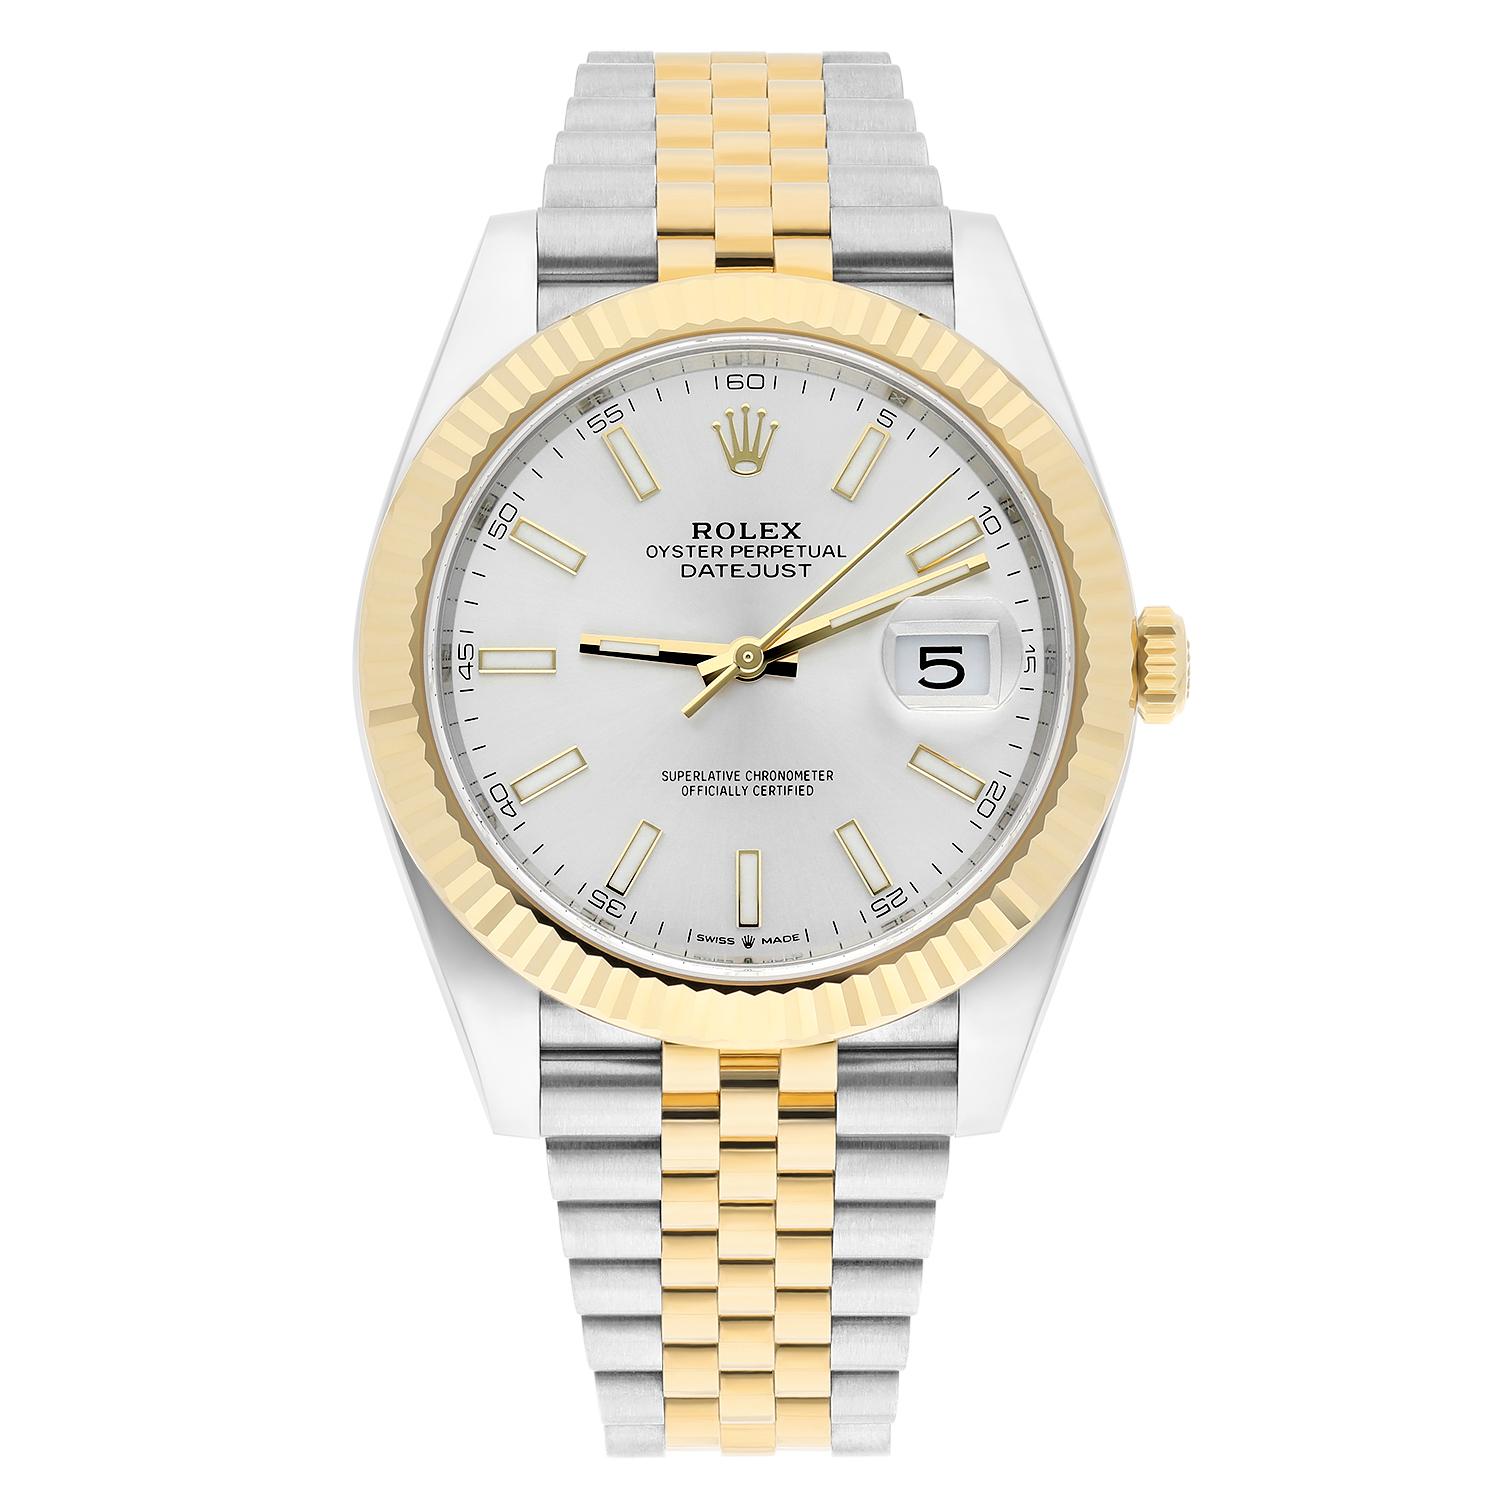 This Rolex Datejust wristwatch is a luxurious and sporty timepiece that exudes elegance and style. Crafted from high-quality stainless steel and 18K yellow gold, this watch features a 41mm case size with a fluted bezel, luminous hands, and indexes,